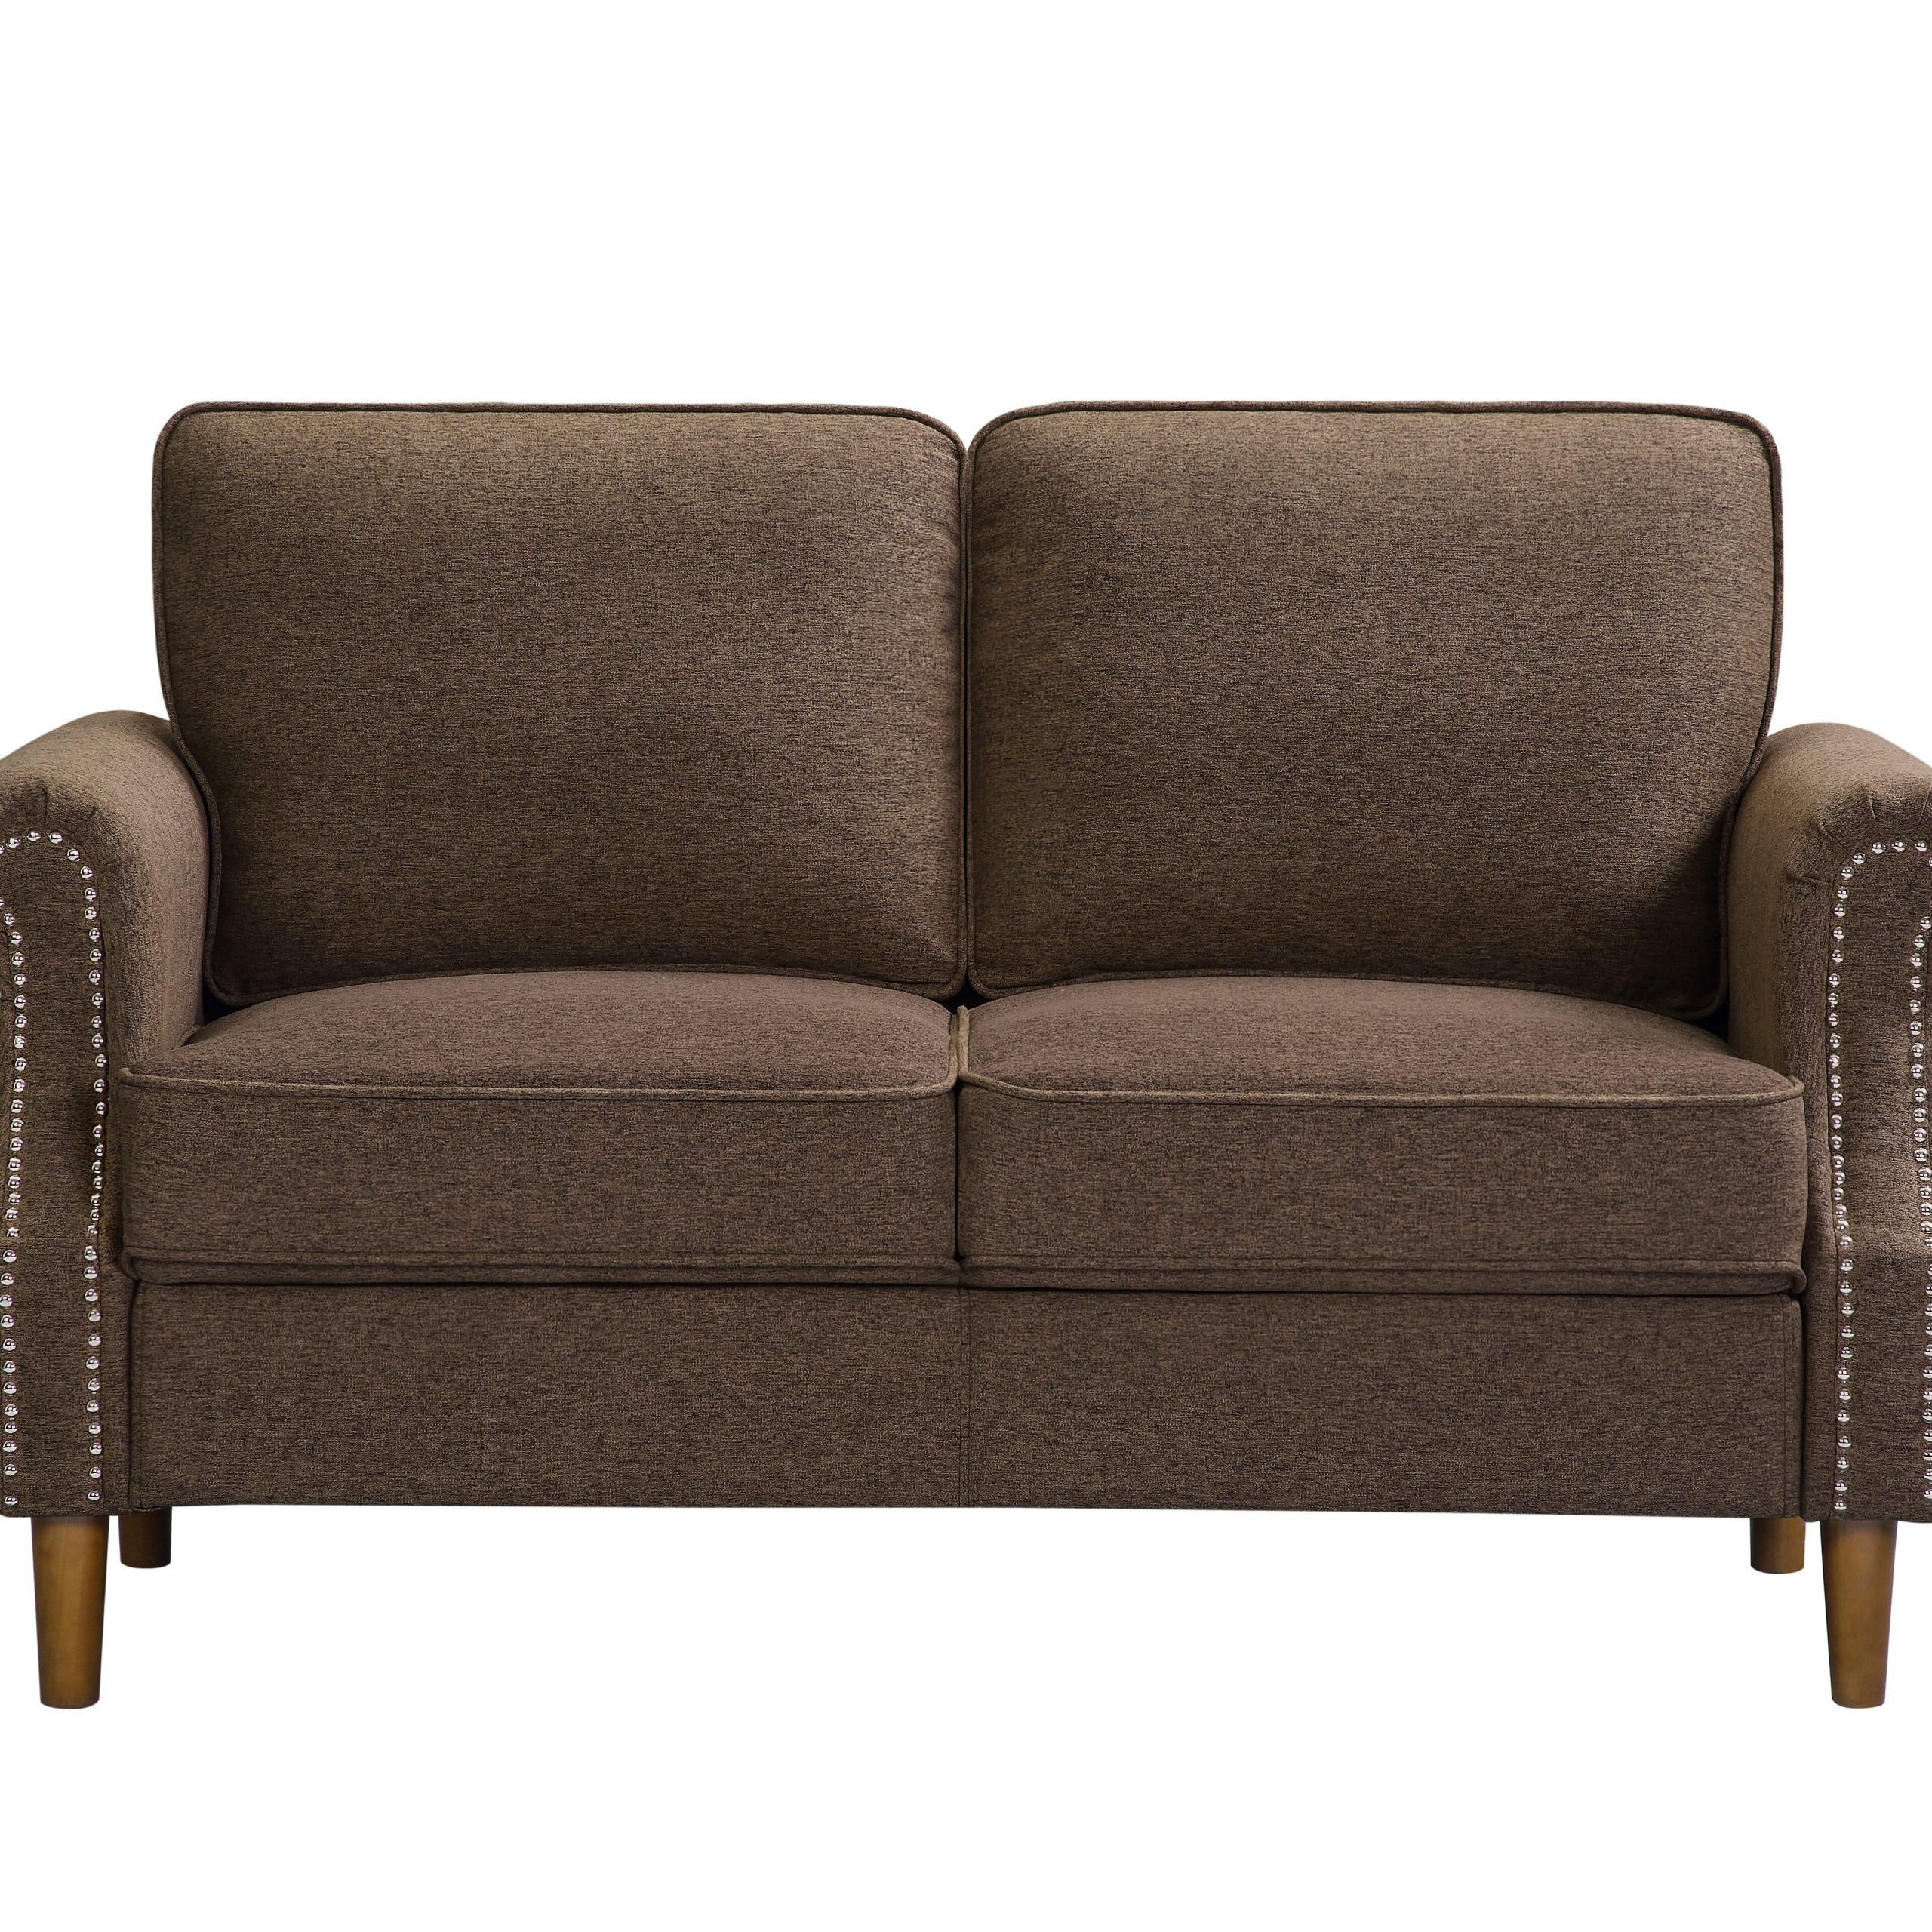 Anyjah Velvet 55.9" Rolled Arm Loveseat Inside Starks Tufted Fabric Chesterfield Chair And Ottoman Sets (Photo 15 of 15)